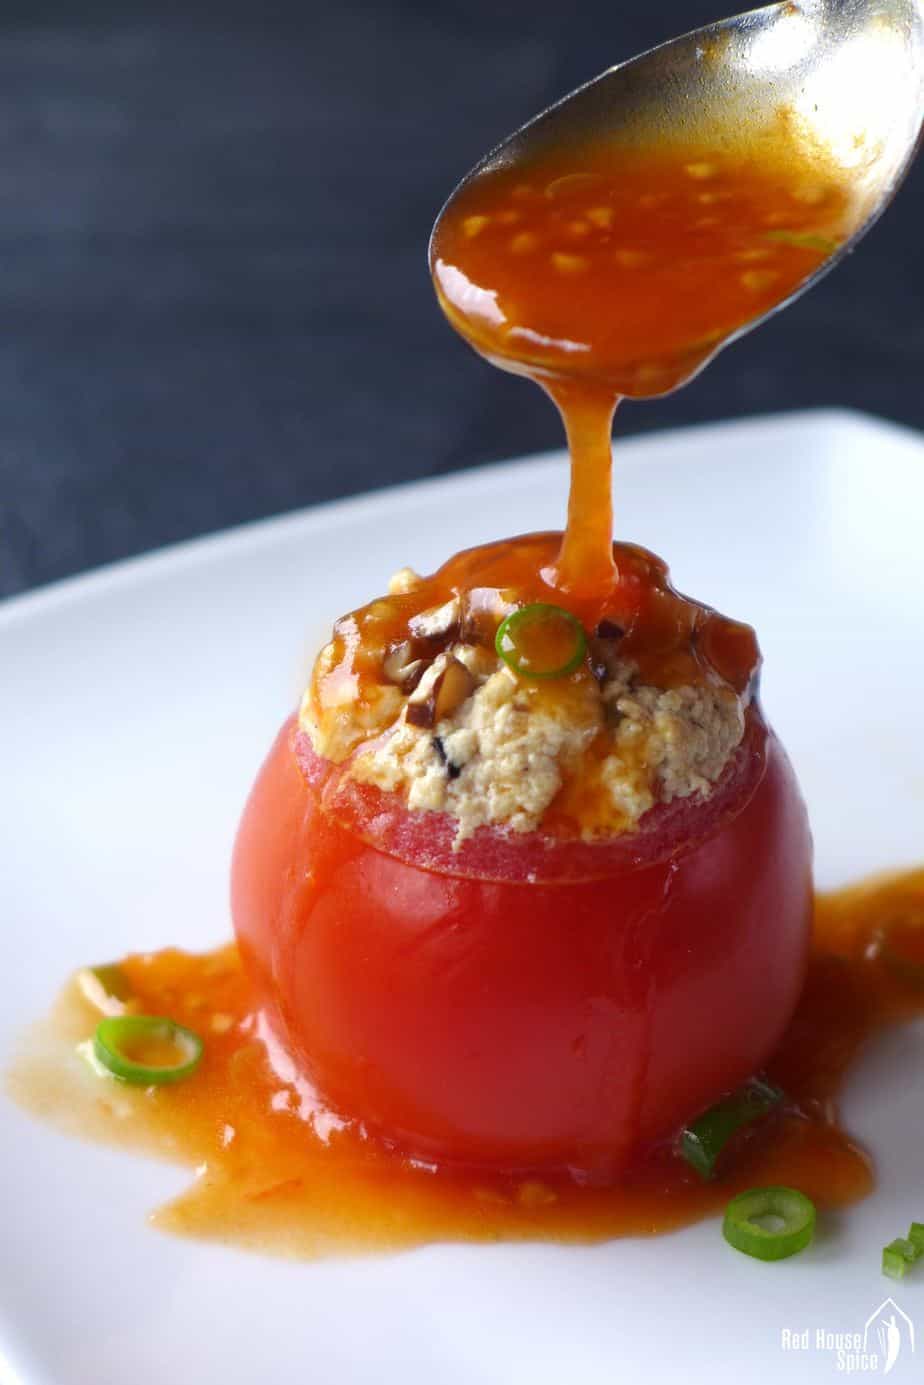 Juicy tomatoes are hollowed and steamed with well seasoned tofu crumbs. These tofu-stuffed tomatoes are then served with a scrumptious sweet and sour sauce.